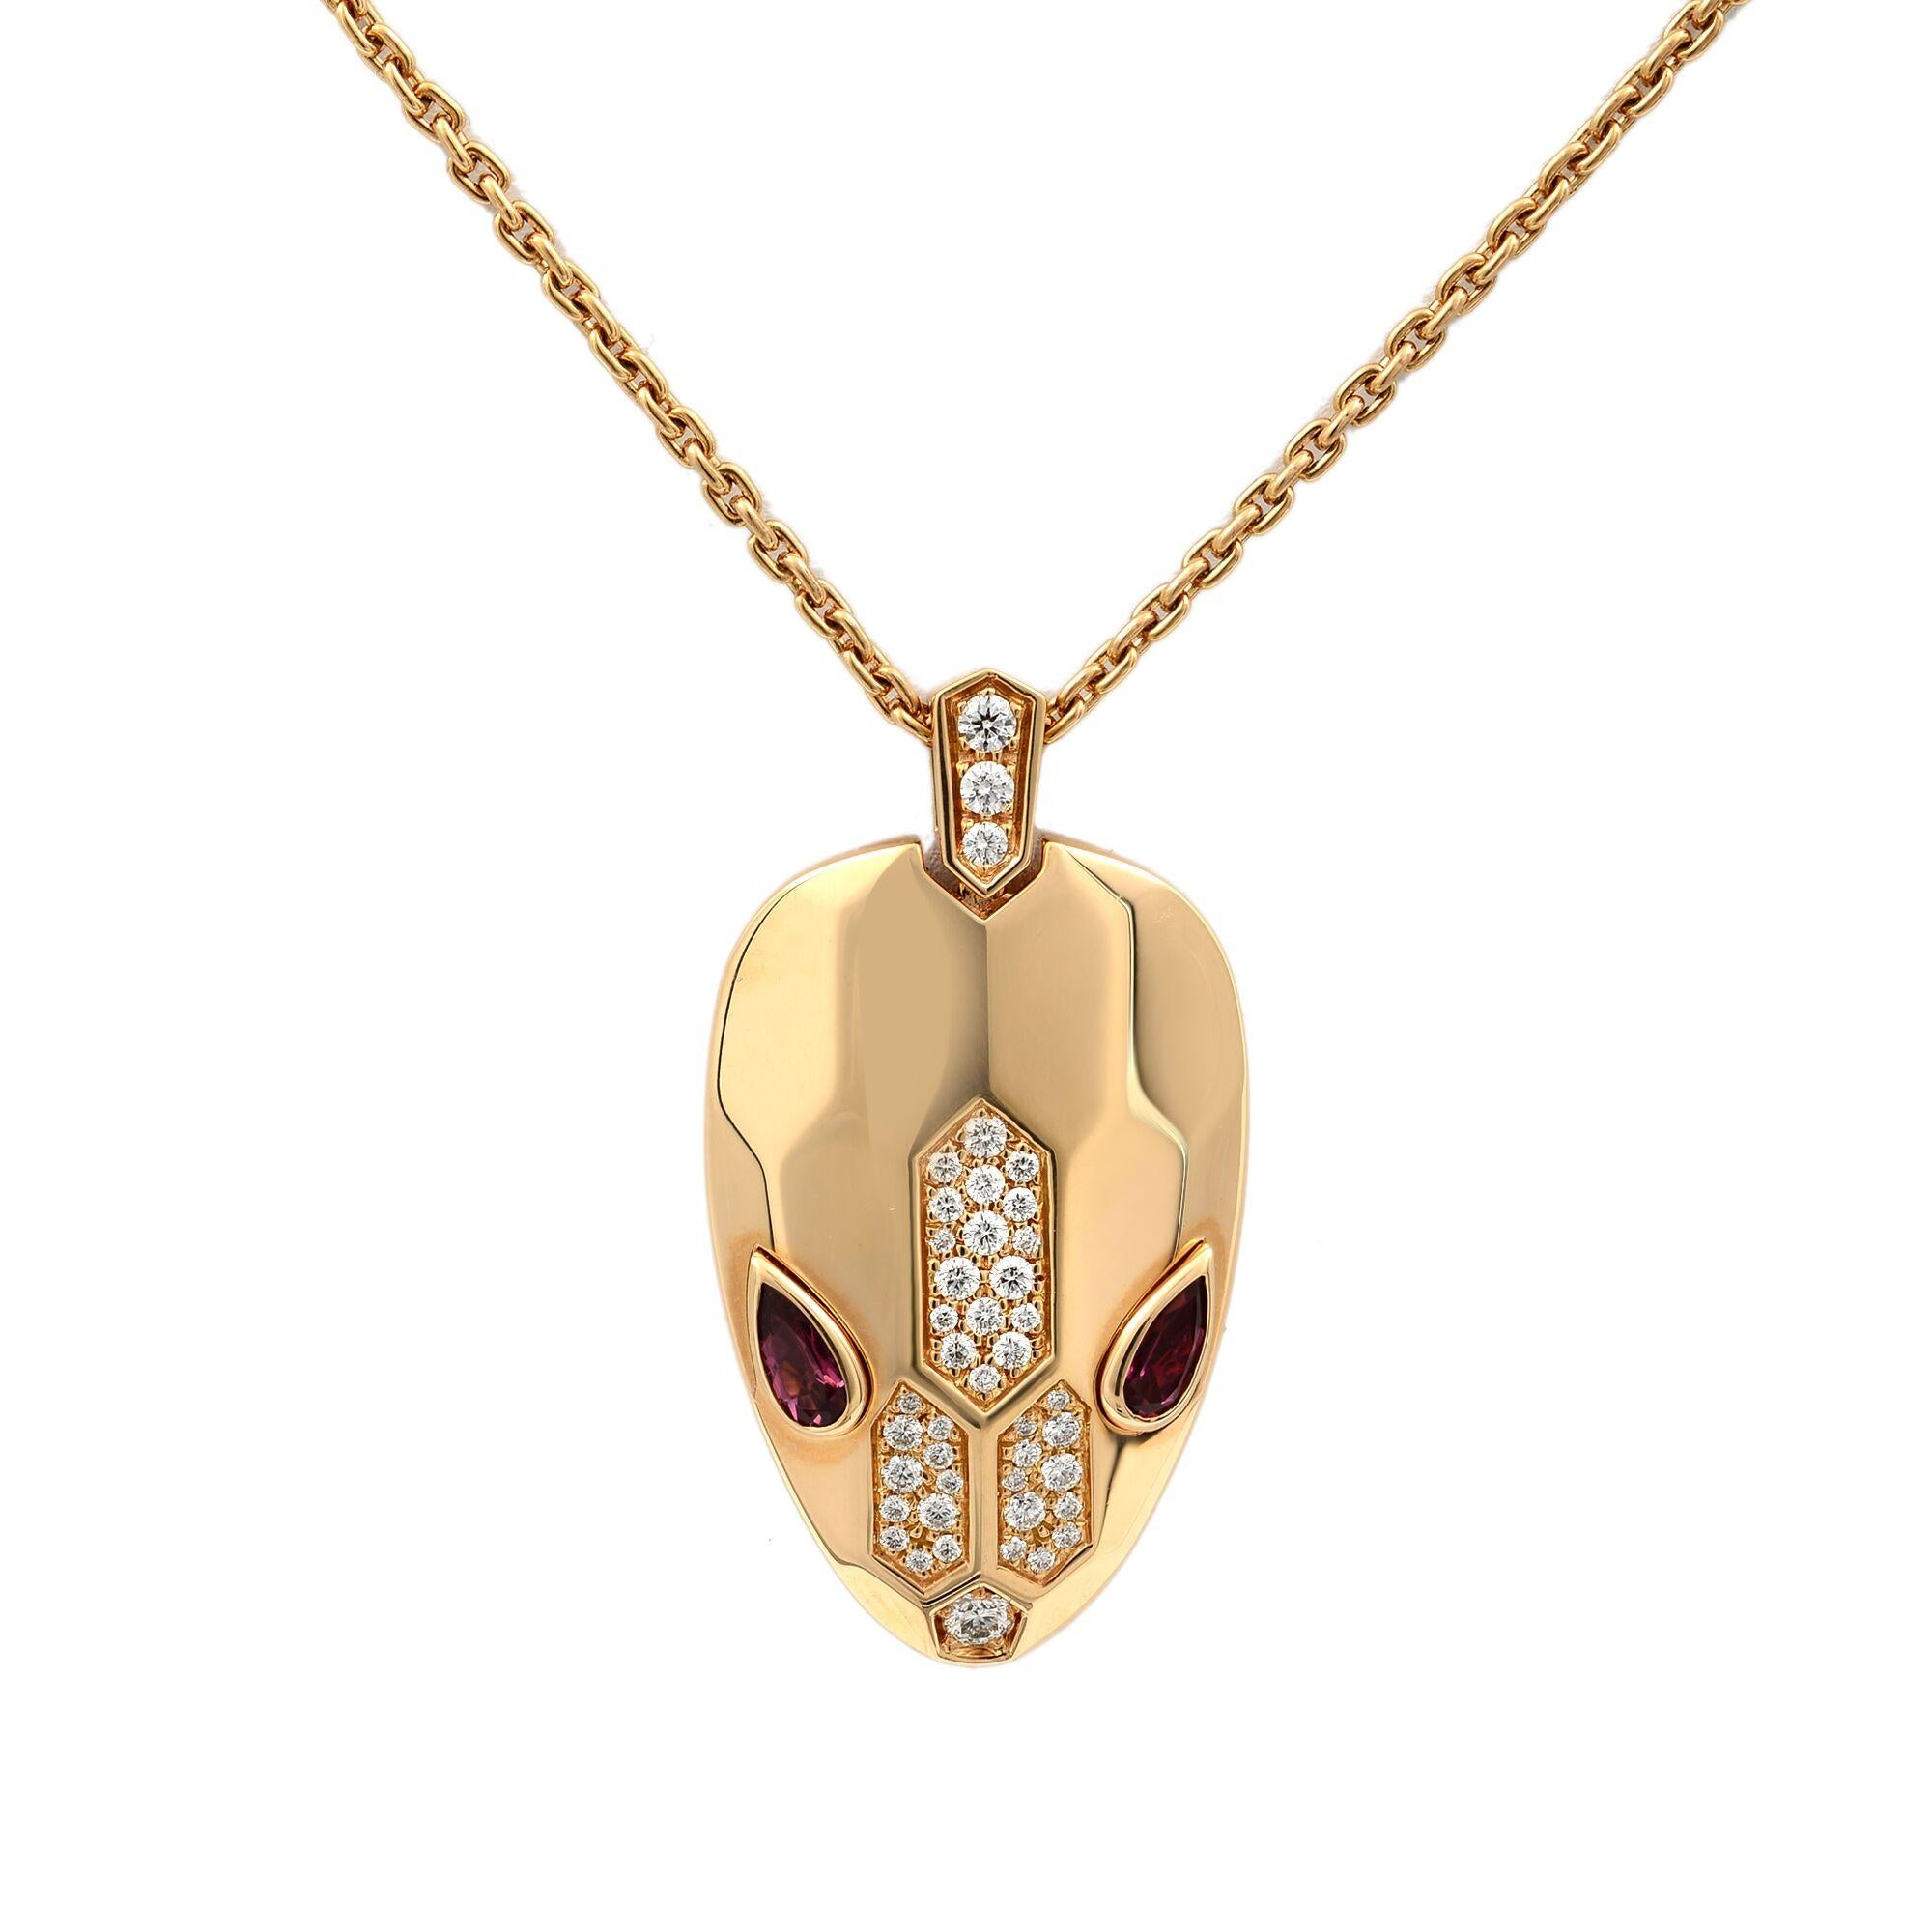 This is an amazing luxury Bvlgari Serpenti necklace with 18 kt rose gold chain and pendant, set with rubellite eyes and demi round cut pavé diamonds.Capturing the power of attraction, the Serpenti necklace glorifies the head of the snake in a